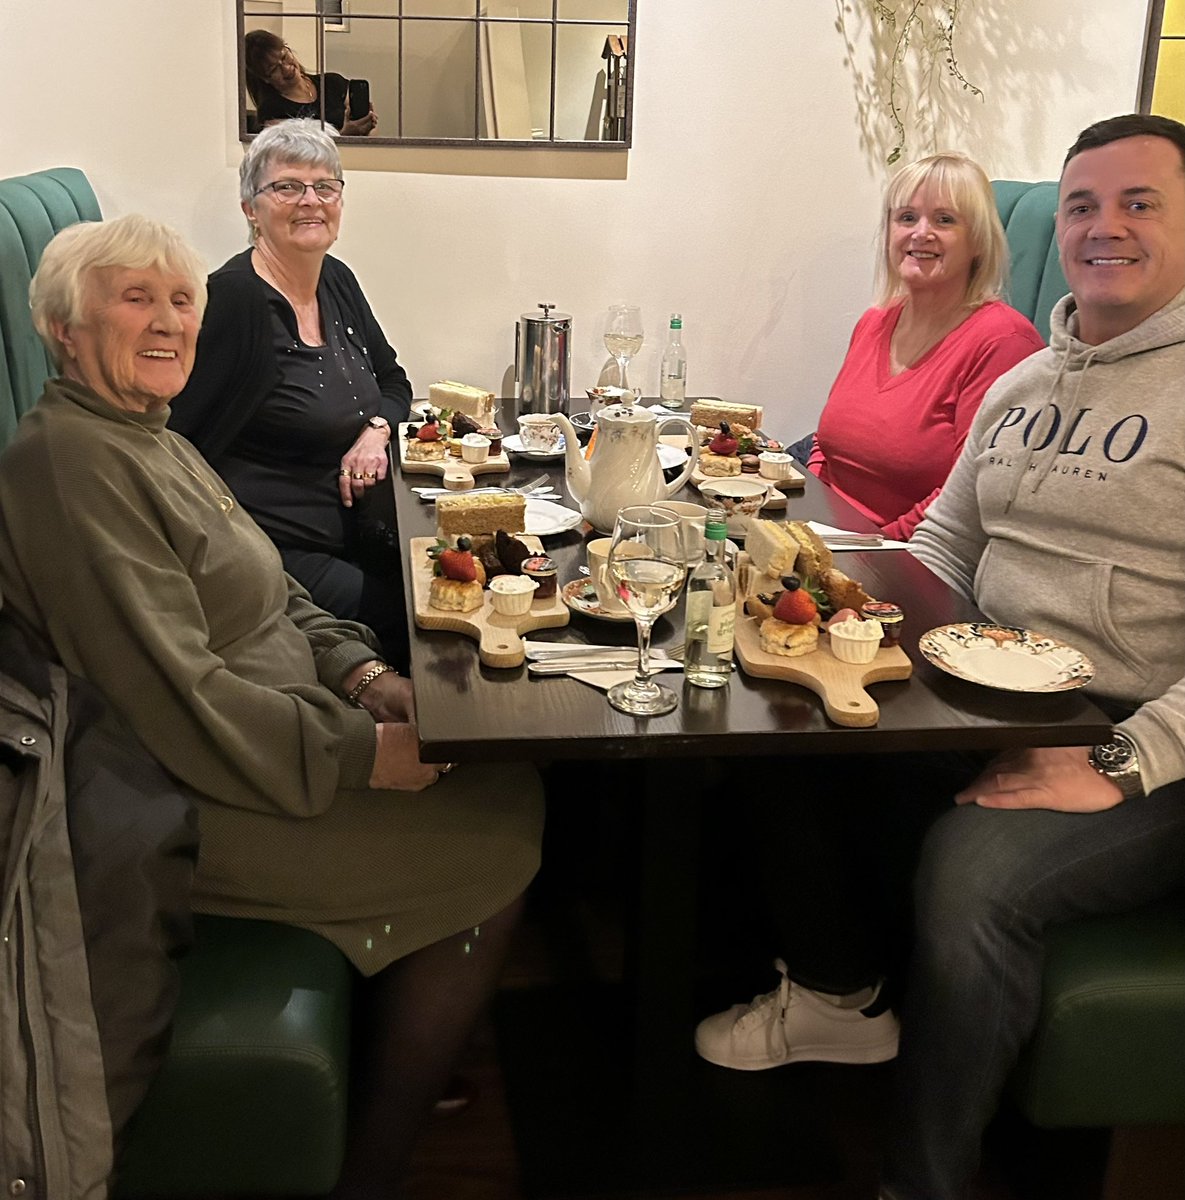 Behind every good man, there’s a good women. Afternoon tea with these @WaterheadARLFC lovelies. If you know, you know ☕️🥪🍰